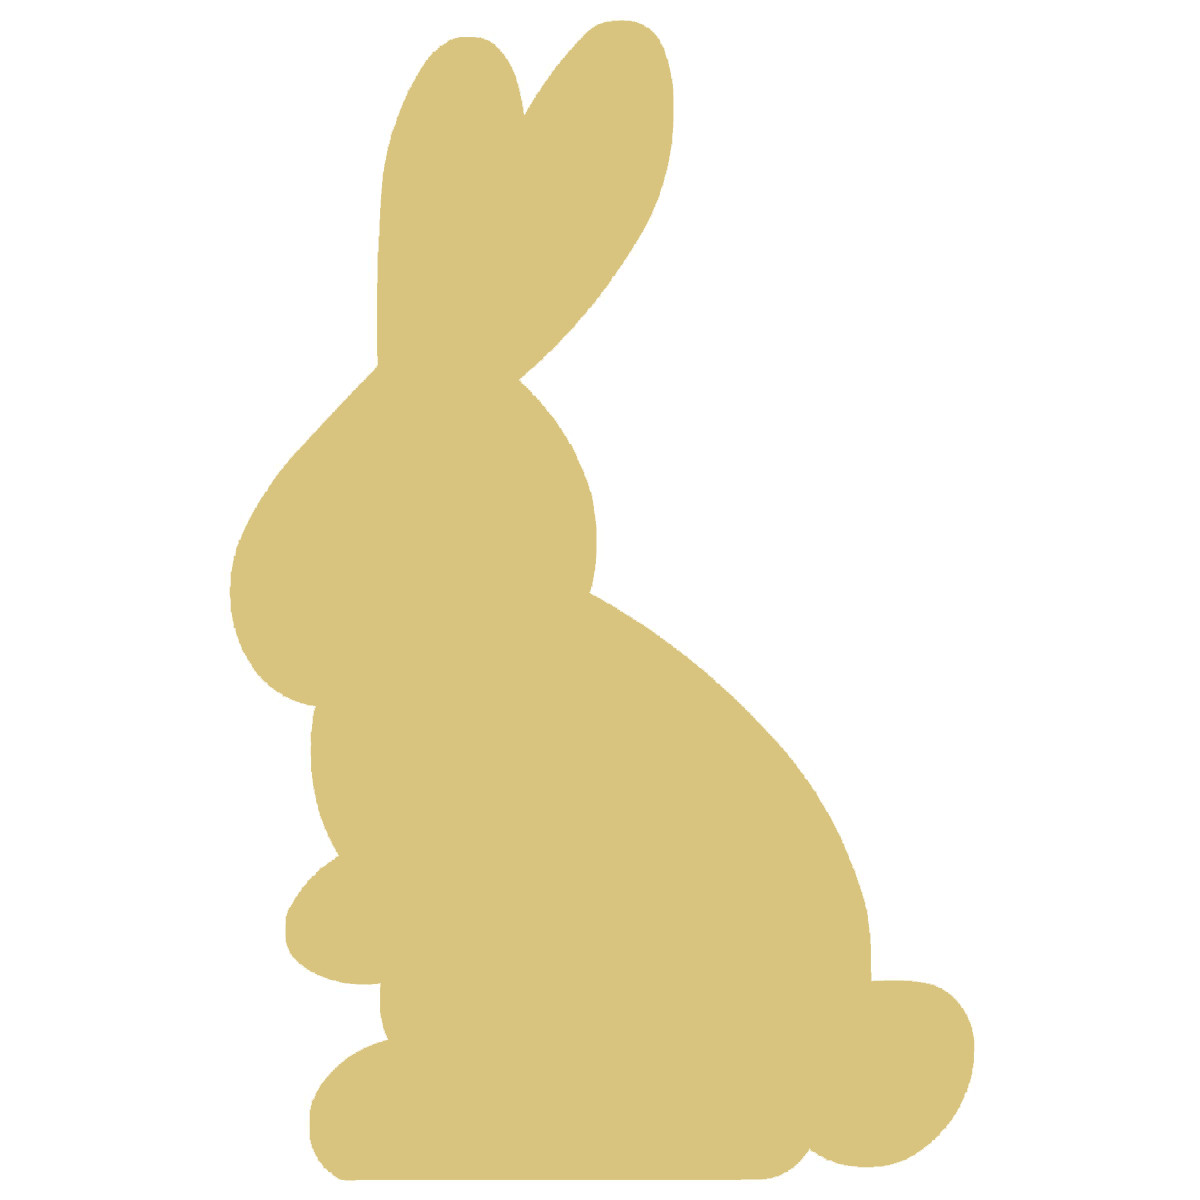 Rabbit drawing clipart images gallery for free download.